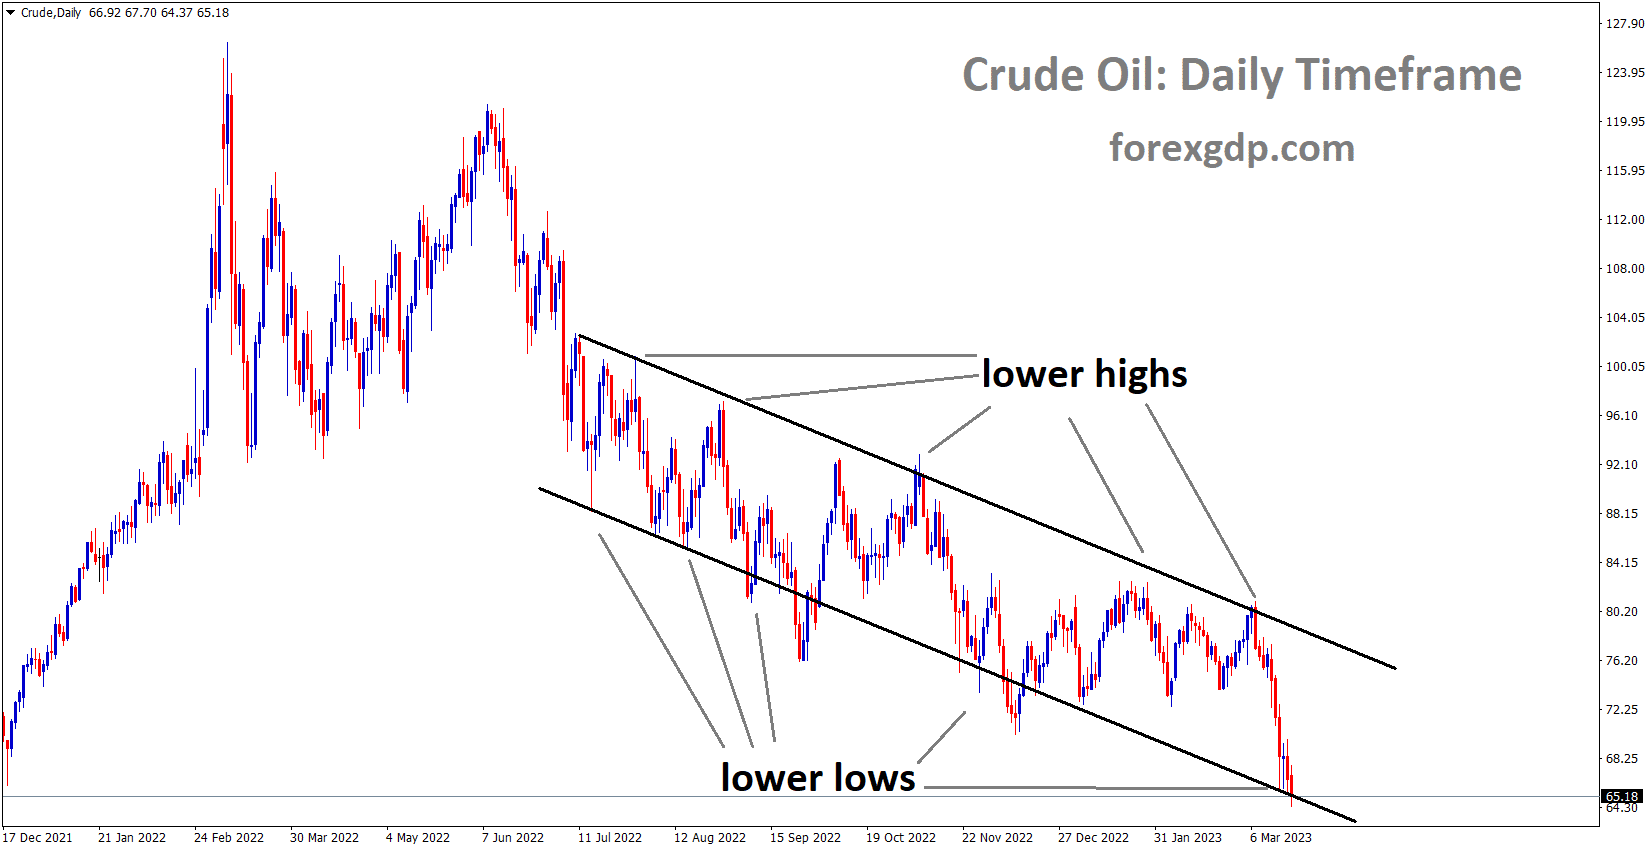 Crude oil price is moving in the Descending channel and the market has reached the lower low area of the channel